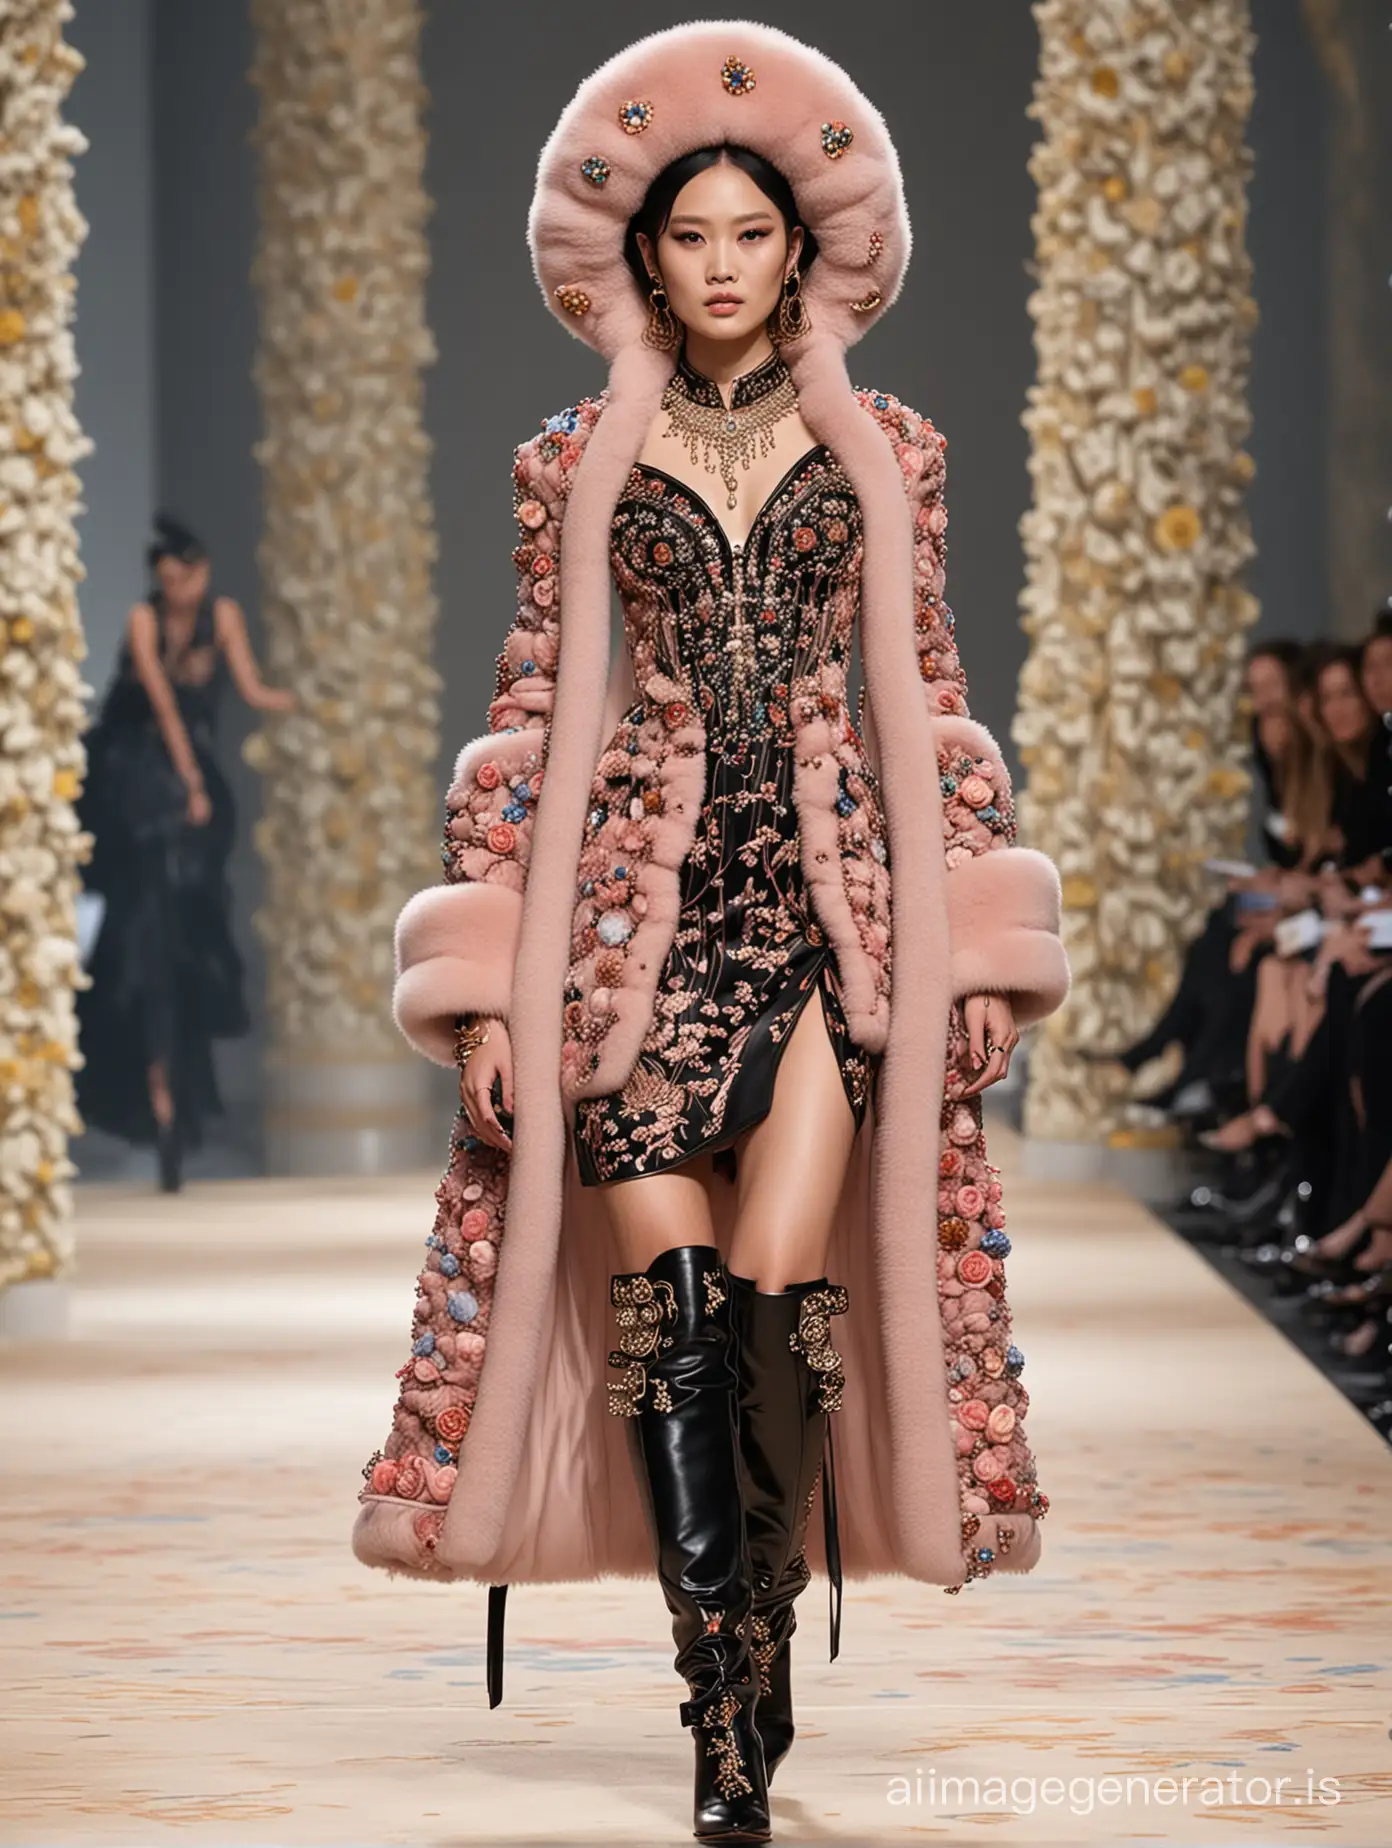 sexy Chinese with a lot of rings, bracelets and collar in floral Christian Dior very long high stiletto heels over the knee boots (spring 2015 couture) and embroidered long mink-fur cap, walking on a catwalk